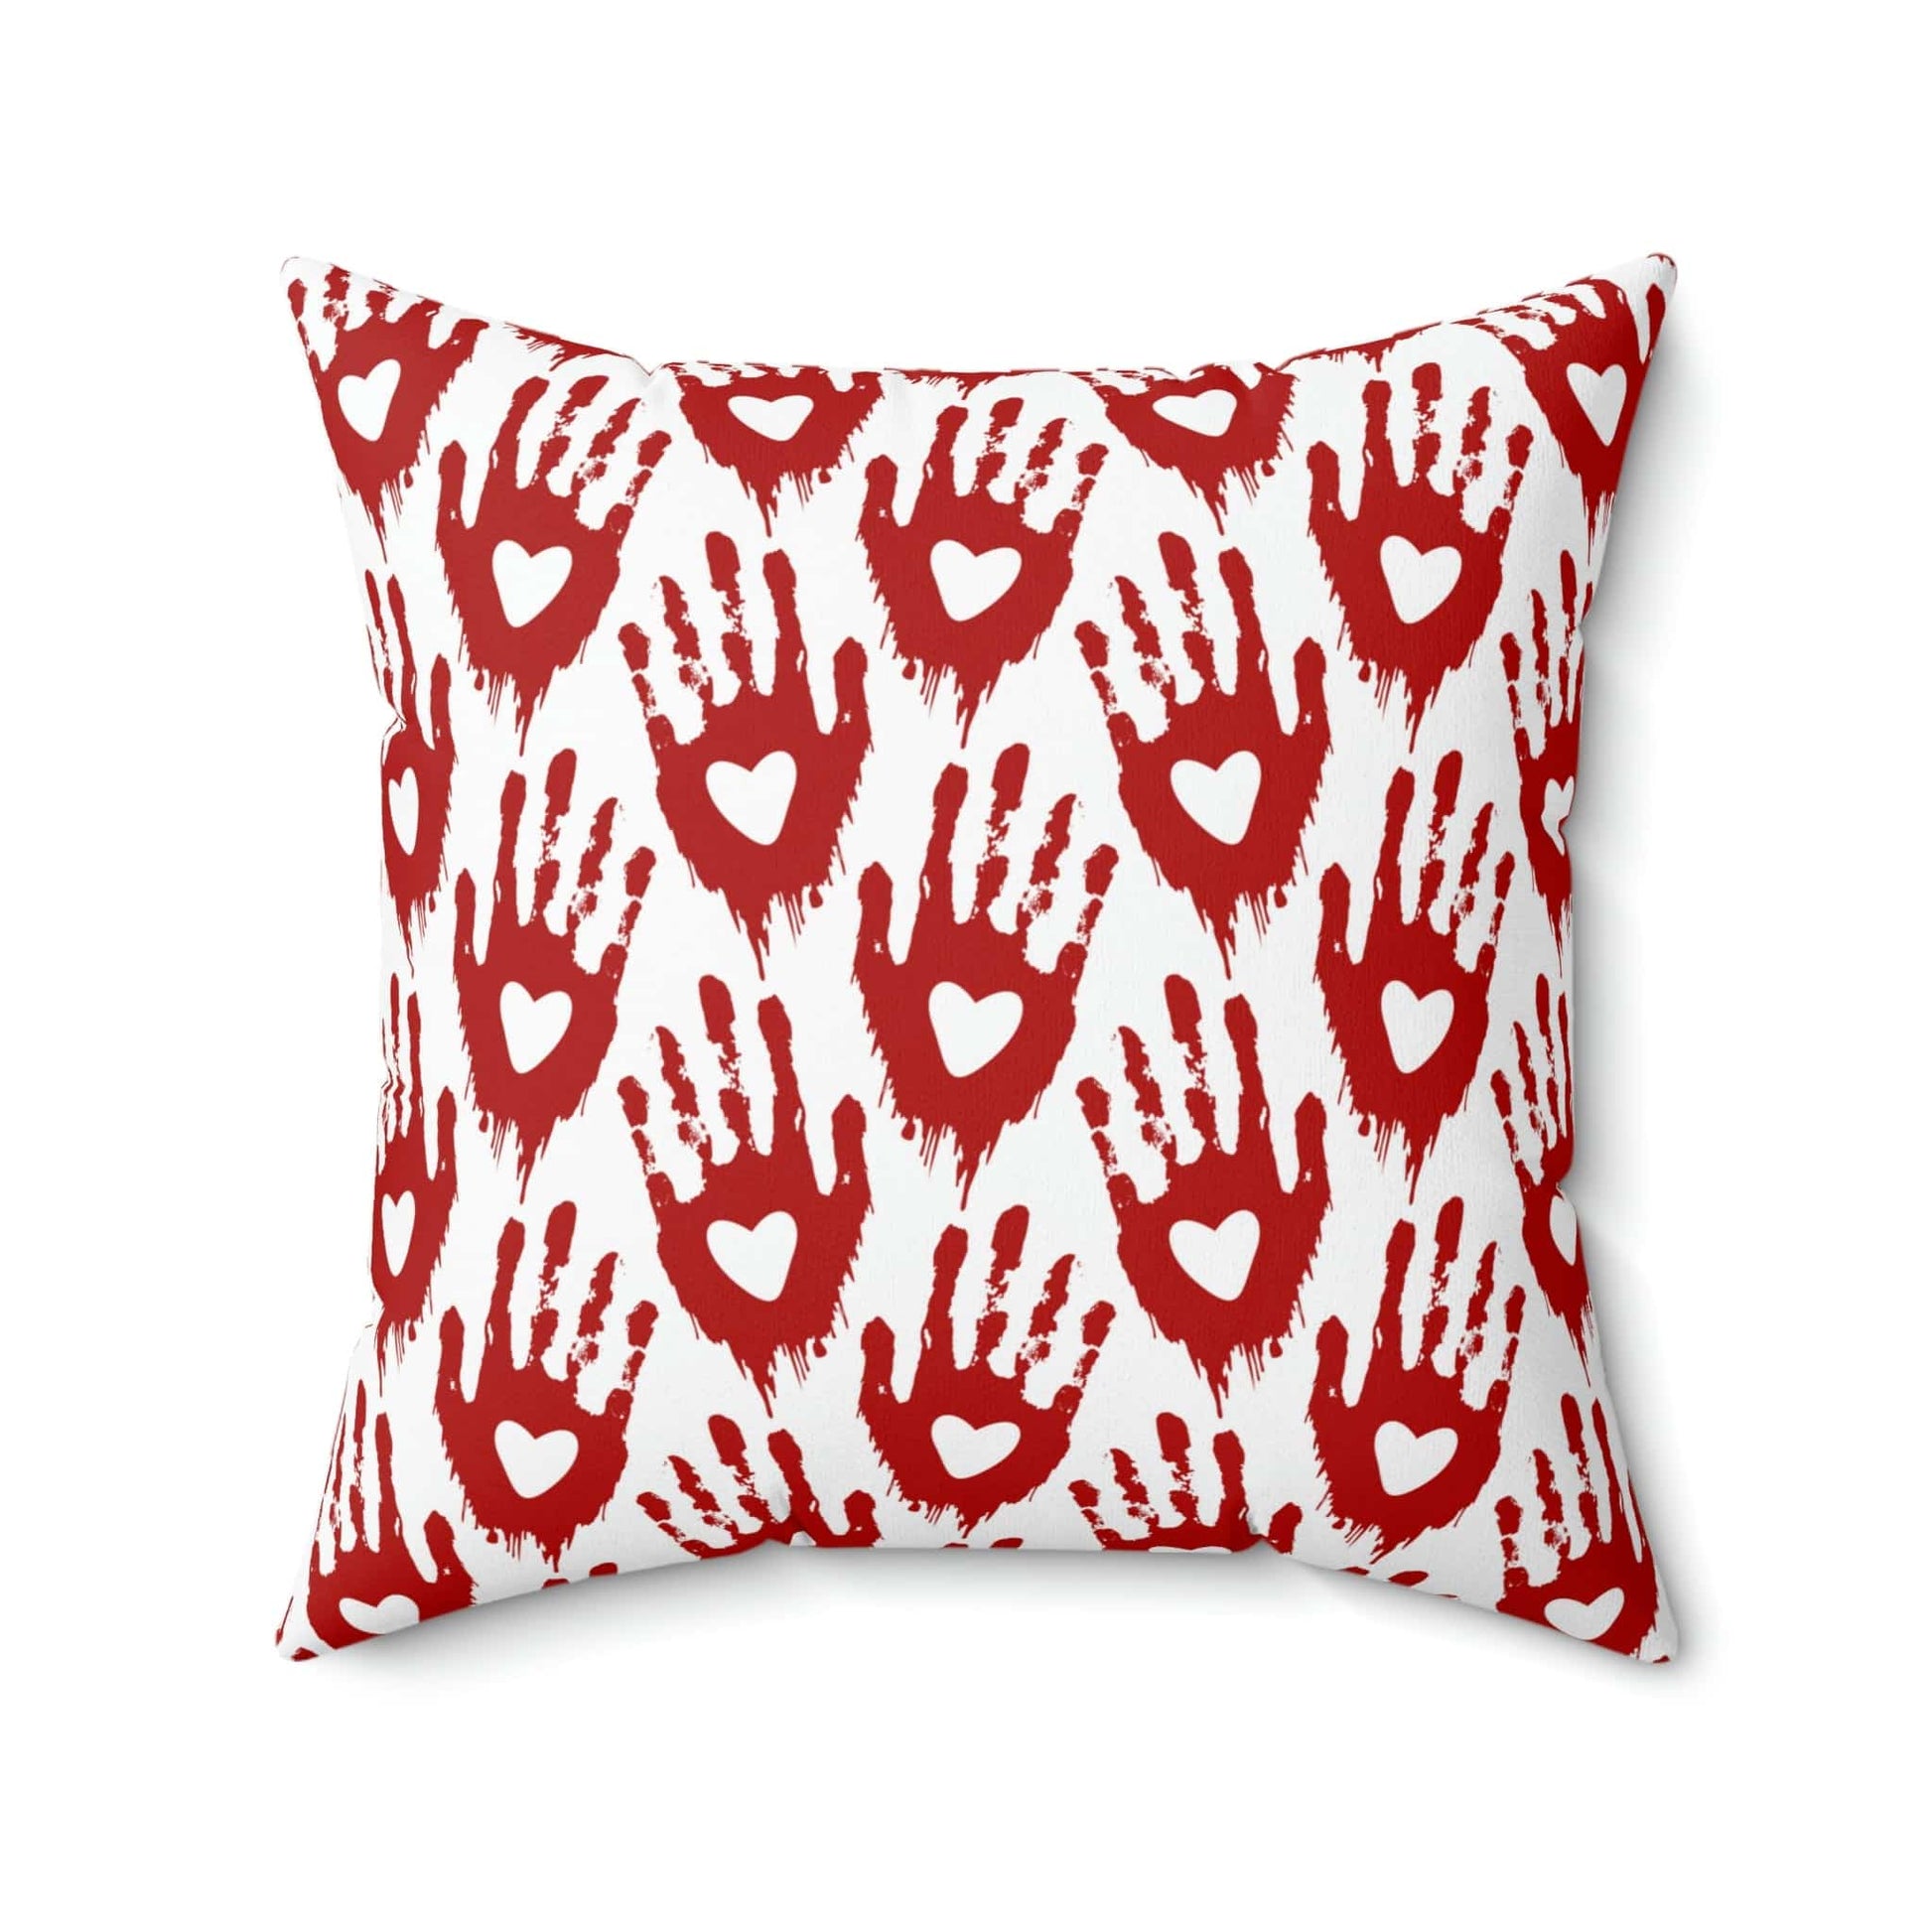 Kate McEnroe New York Halloween Pillow Case - Red Heart Hand Pattern Throw Pillow Covers 20" × 20" 3549431914